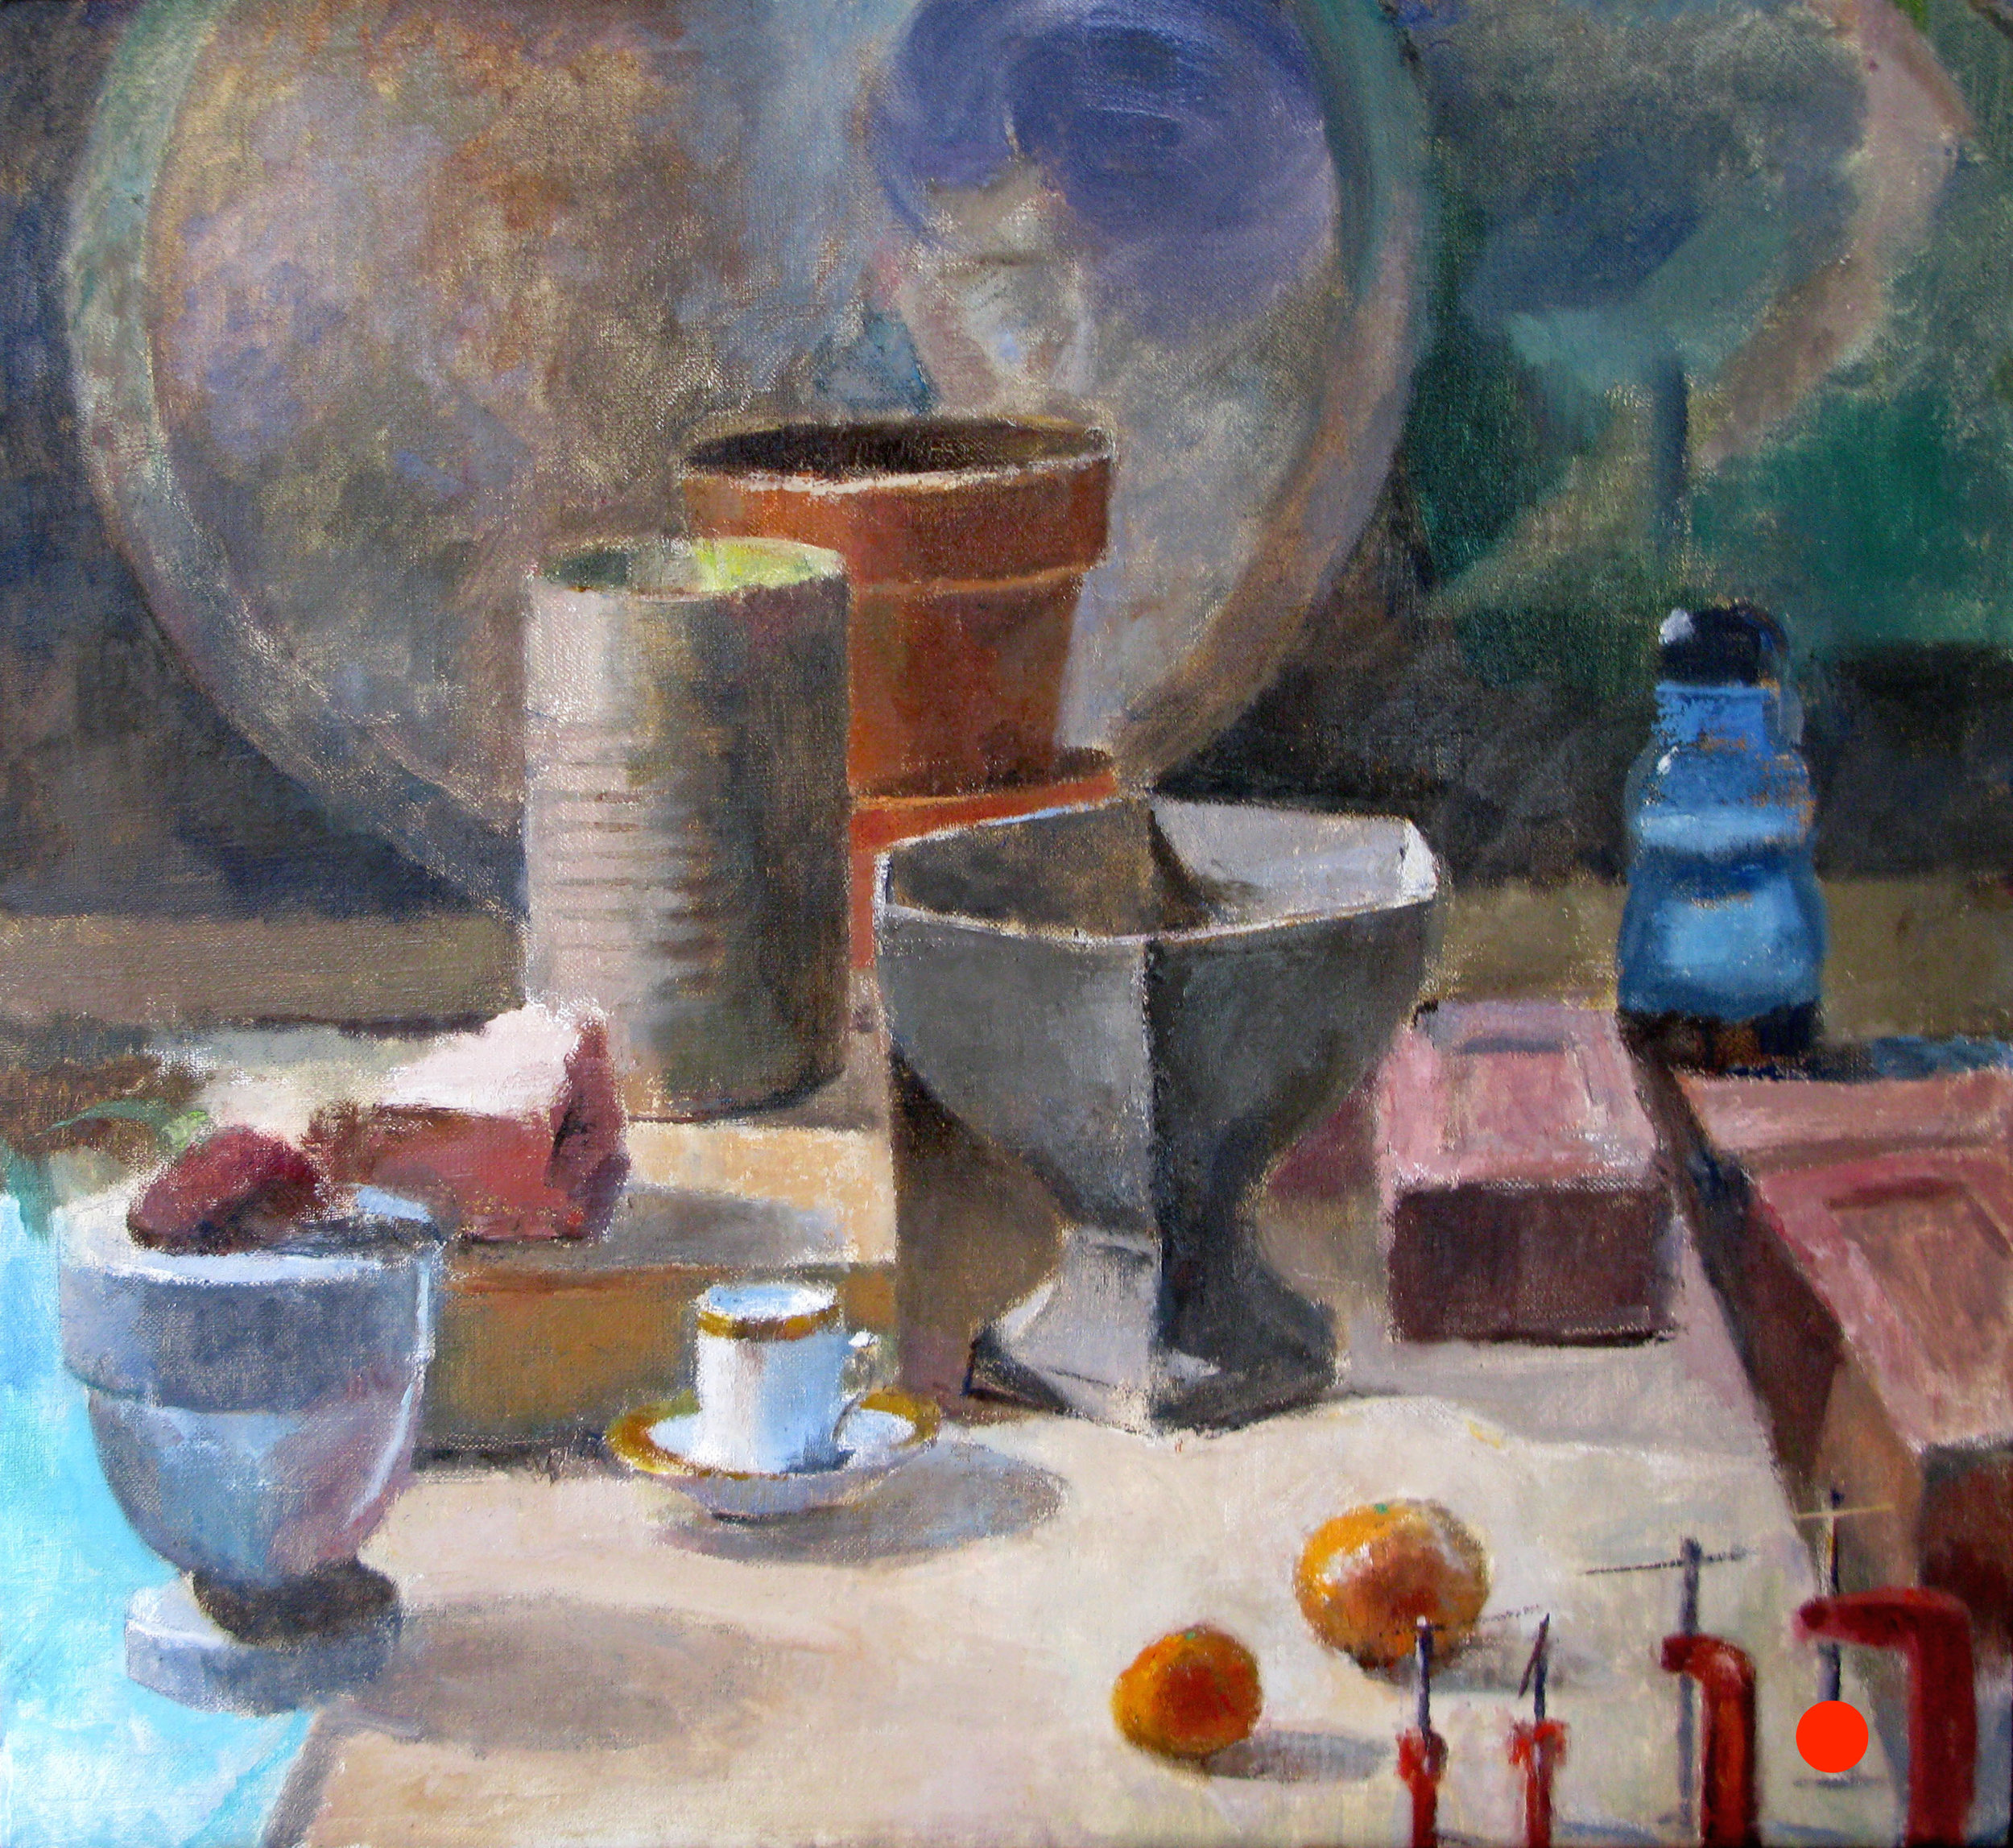 Still life with Tea Cup and Oranges, 22 x 24 inches, oil on linen, 2012.